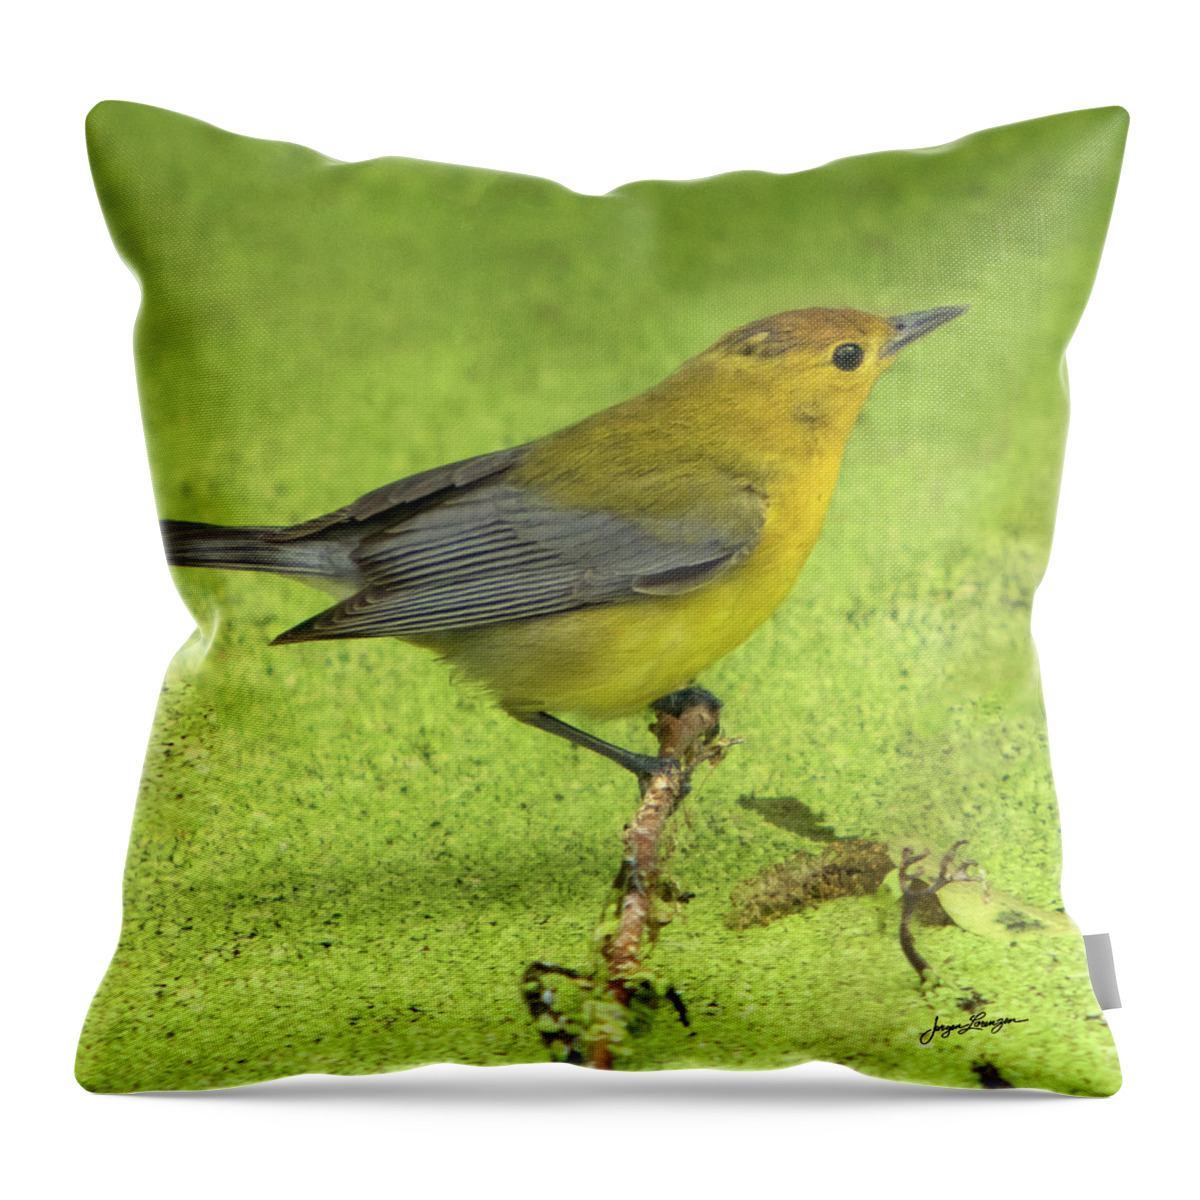 Prothonotary Warbler Throw Pillow featuring the photograph Prothonotary Warbler by Jurgen Lorenzen